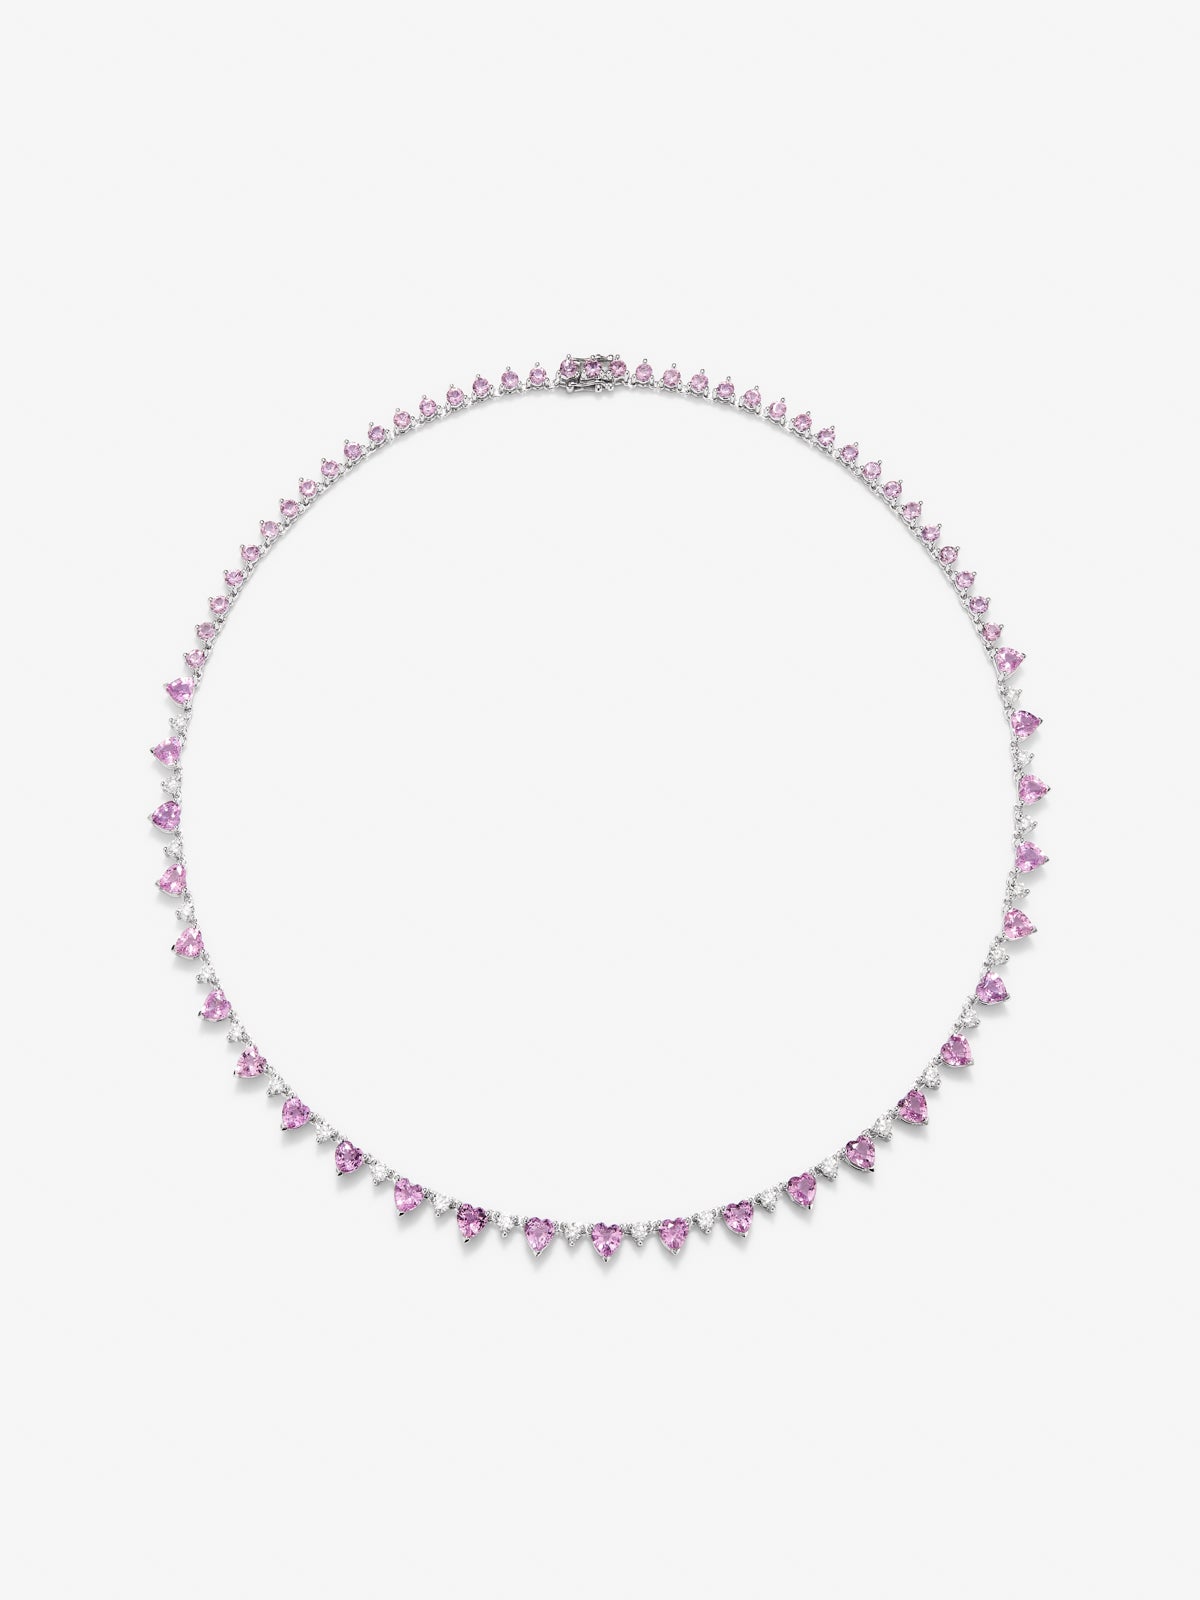 18K white gold necklace with brilliant-cut pink sapphires and 15.76 ct heart and 1.51 ct brilliant-cut diamonds